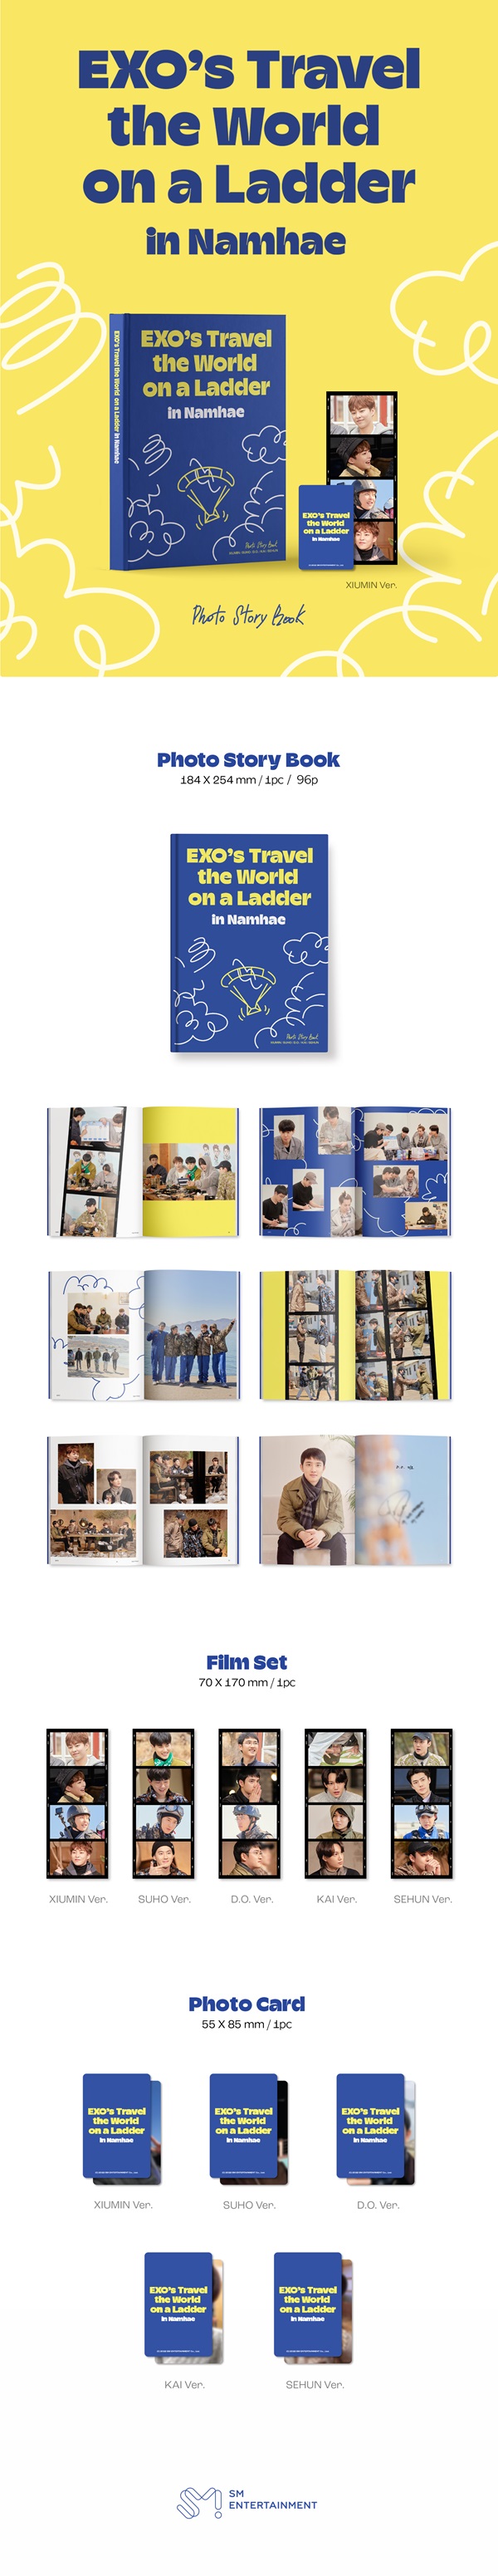 EXOのあみだで世界旅行 シーズン3:南海編 PHOTO STORY BOOK